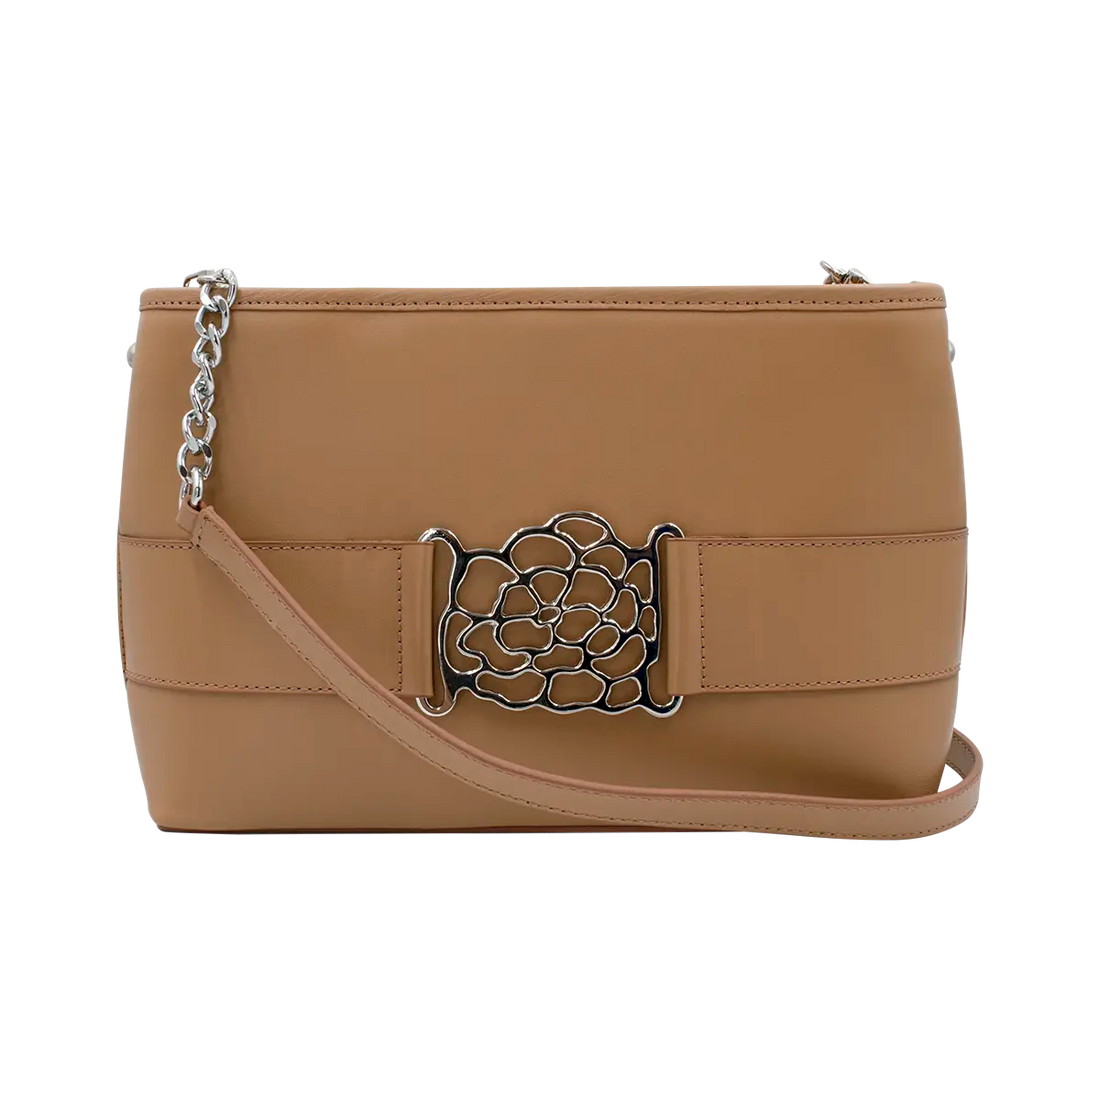 small tan leather shoulder bag with metal accent. Fashion accessory for women in San Diego, CA.